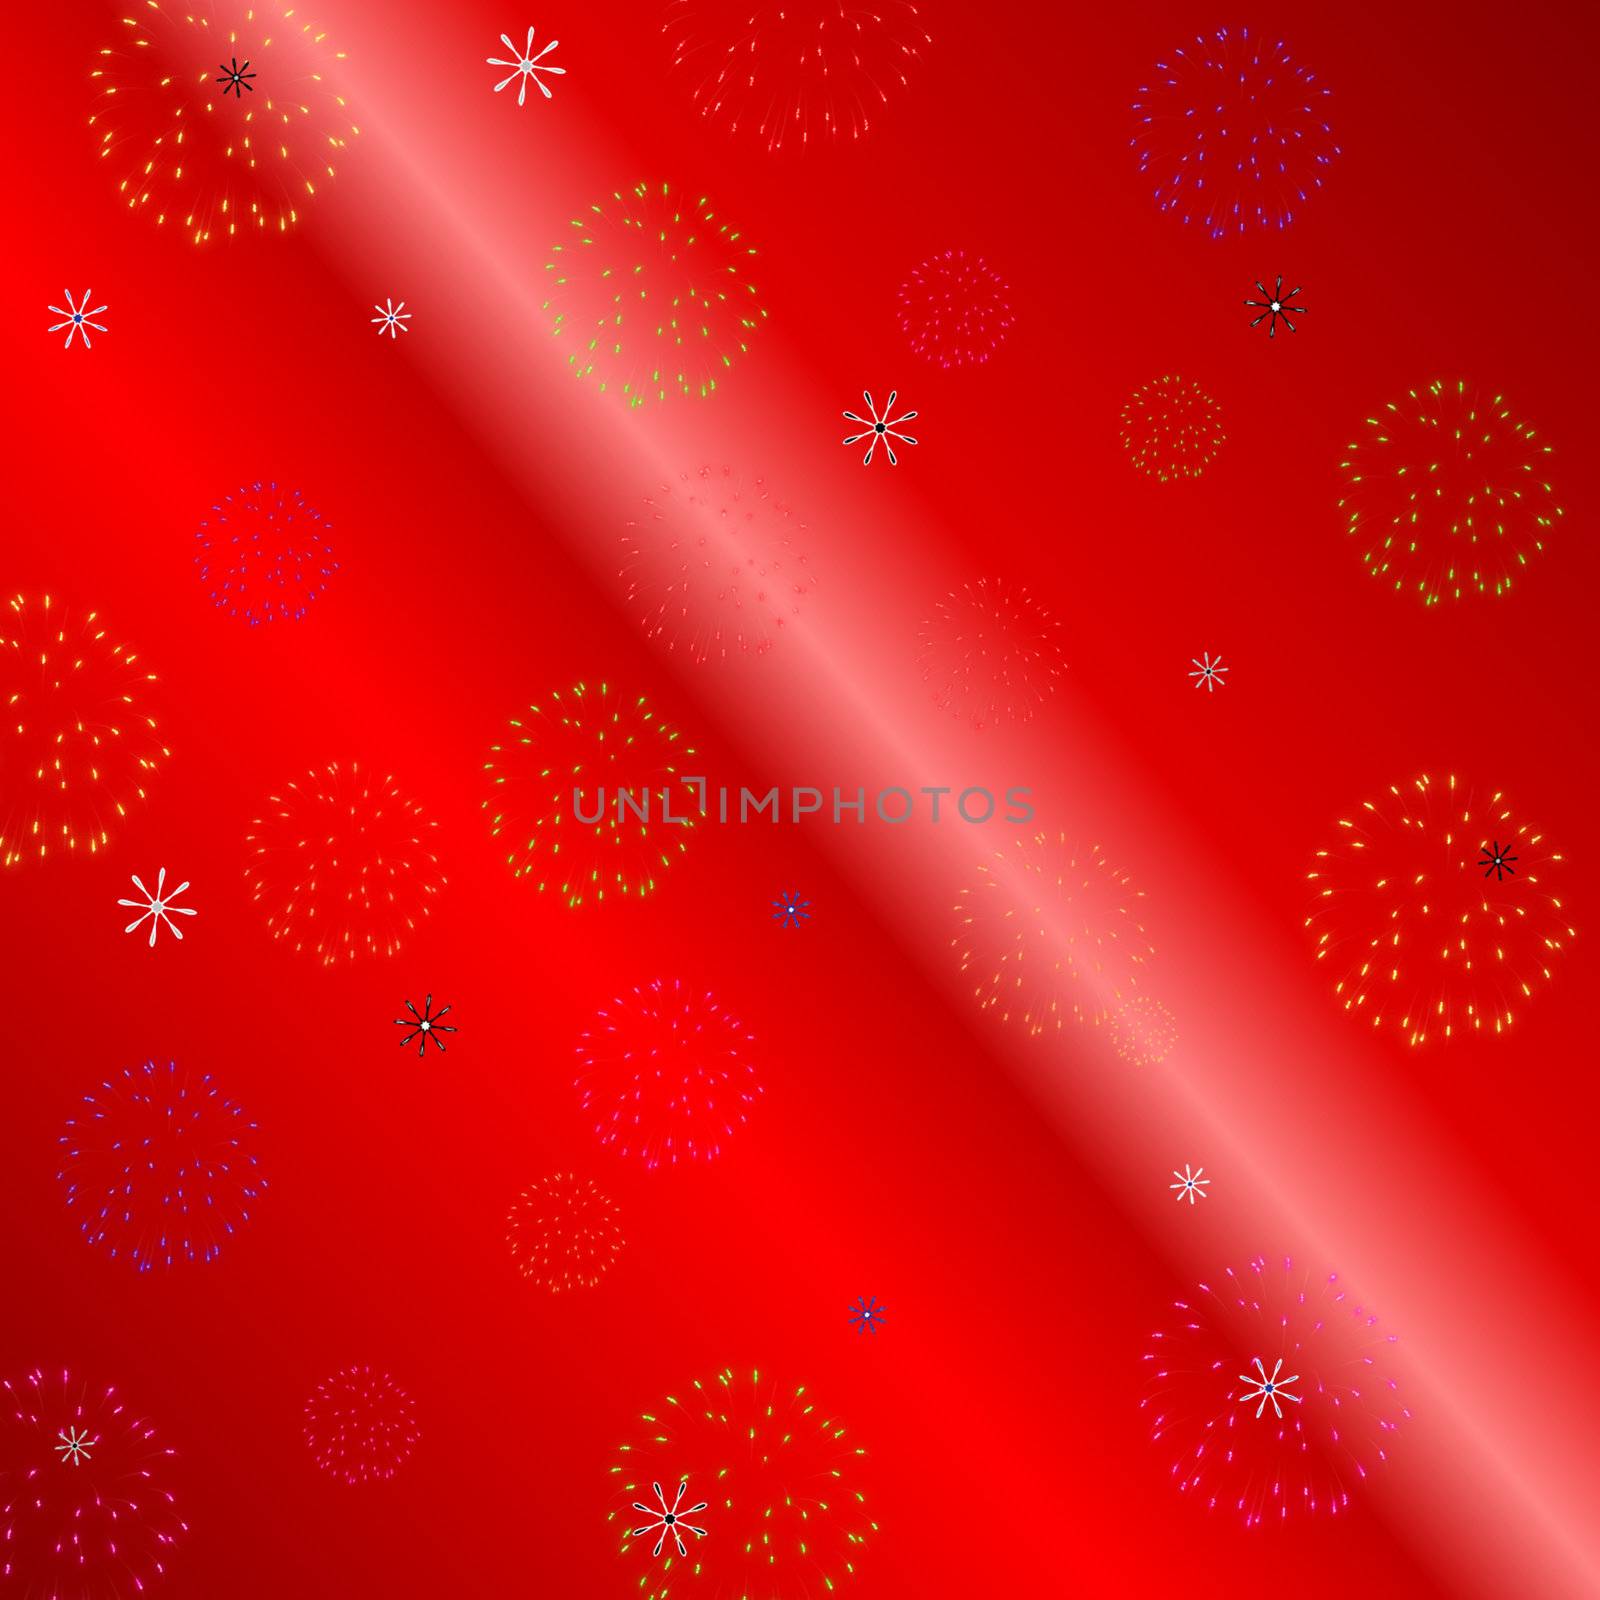 red paper effect background by leafy